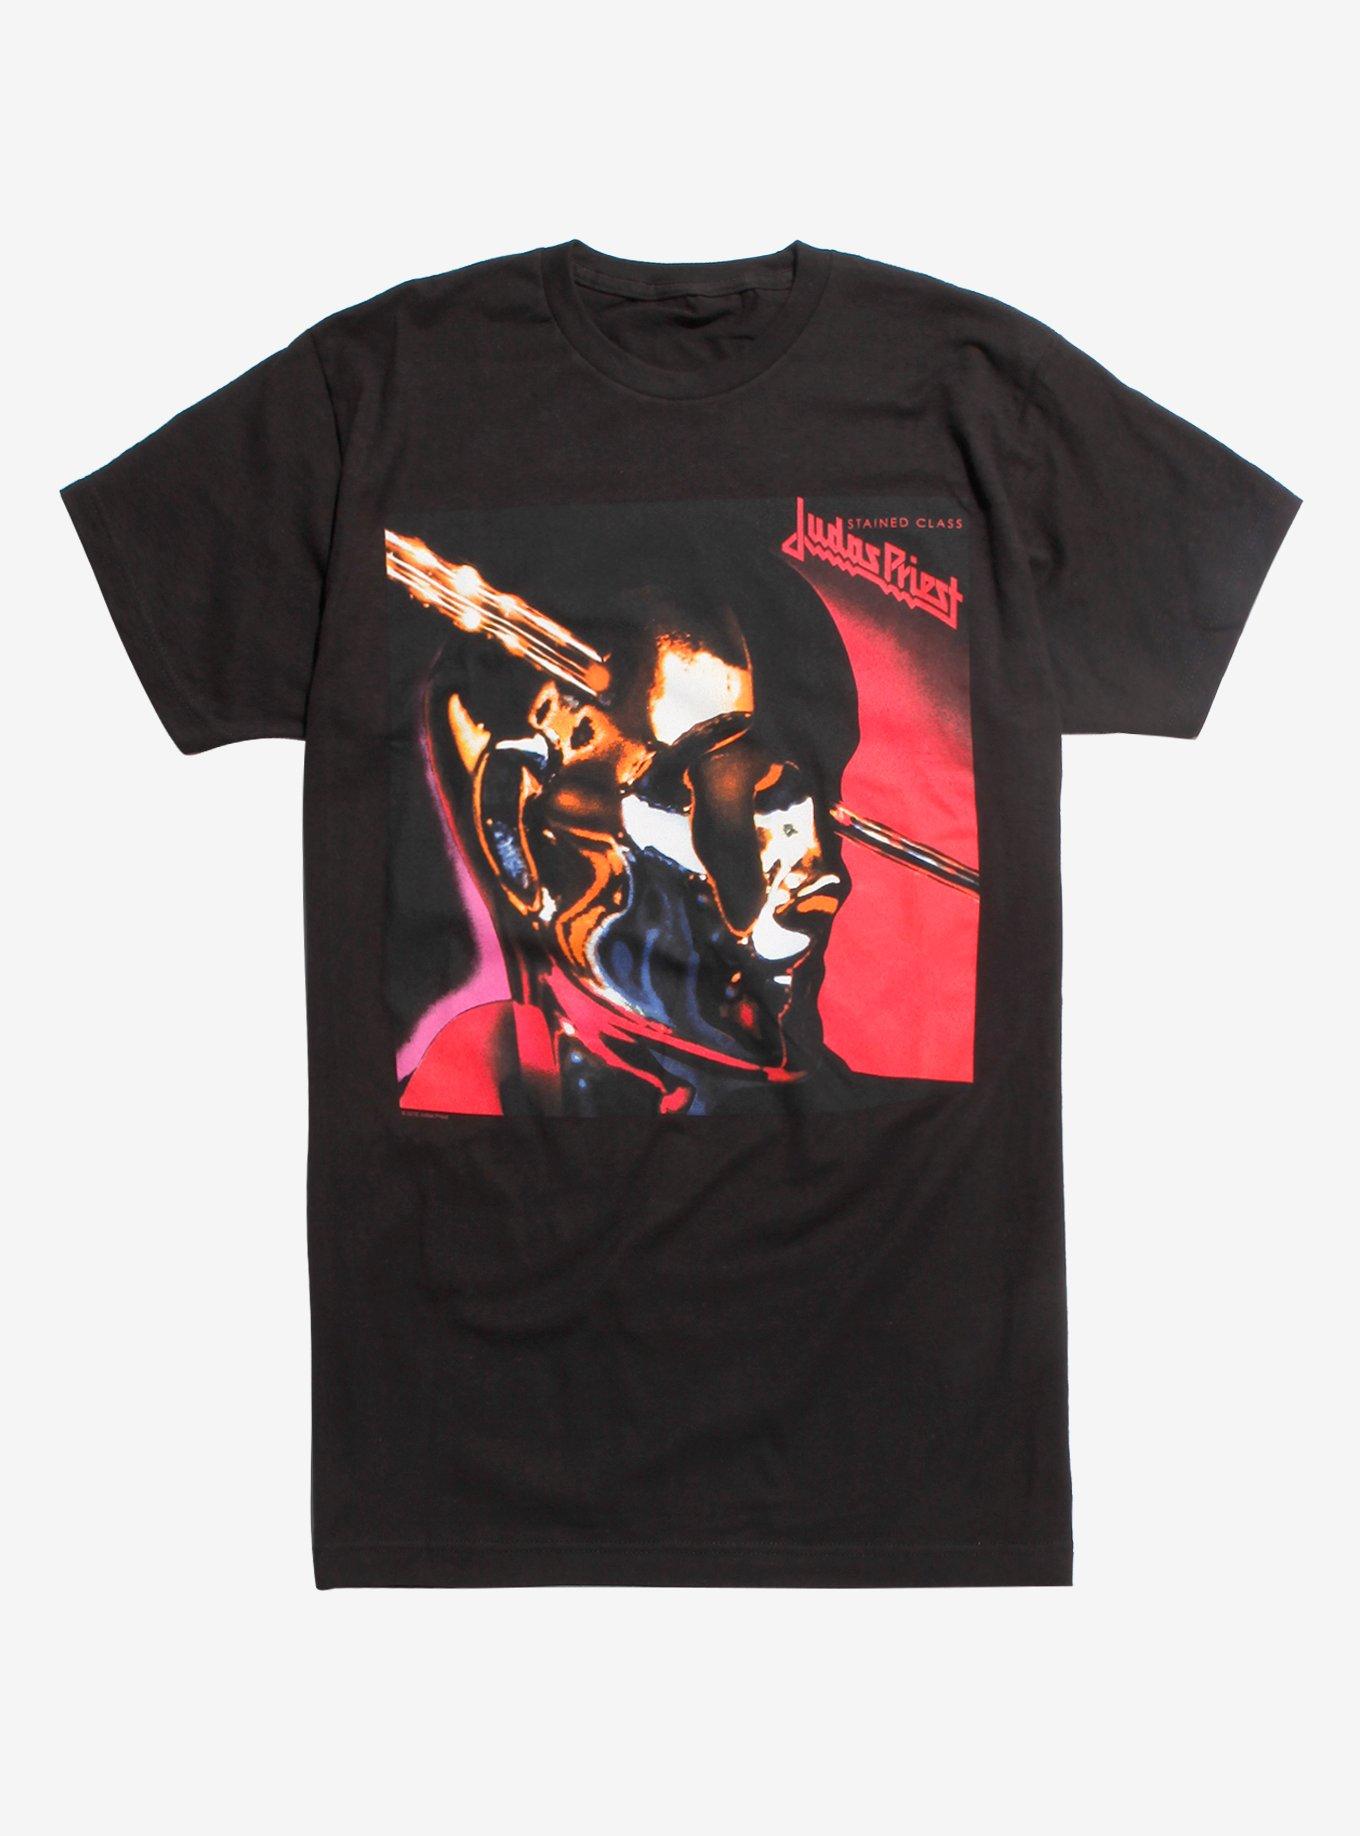 Judas Priest Stained Class Album Cover Shirt | Hot Topic